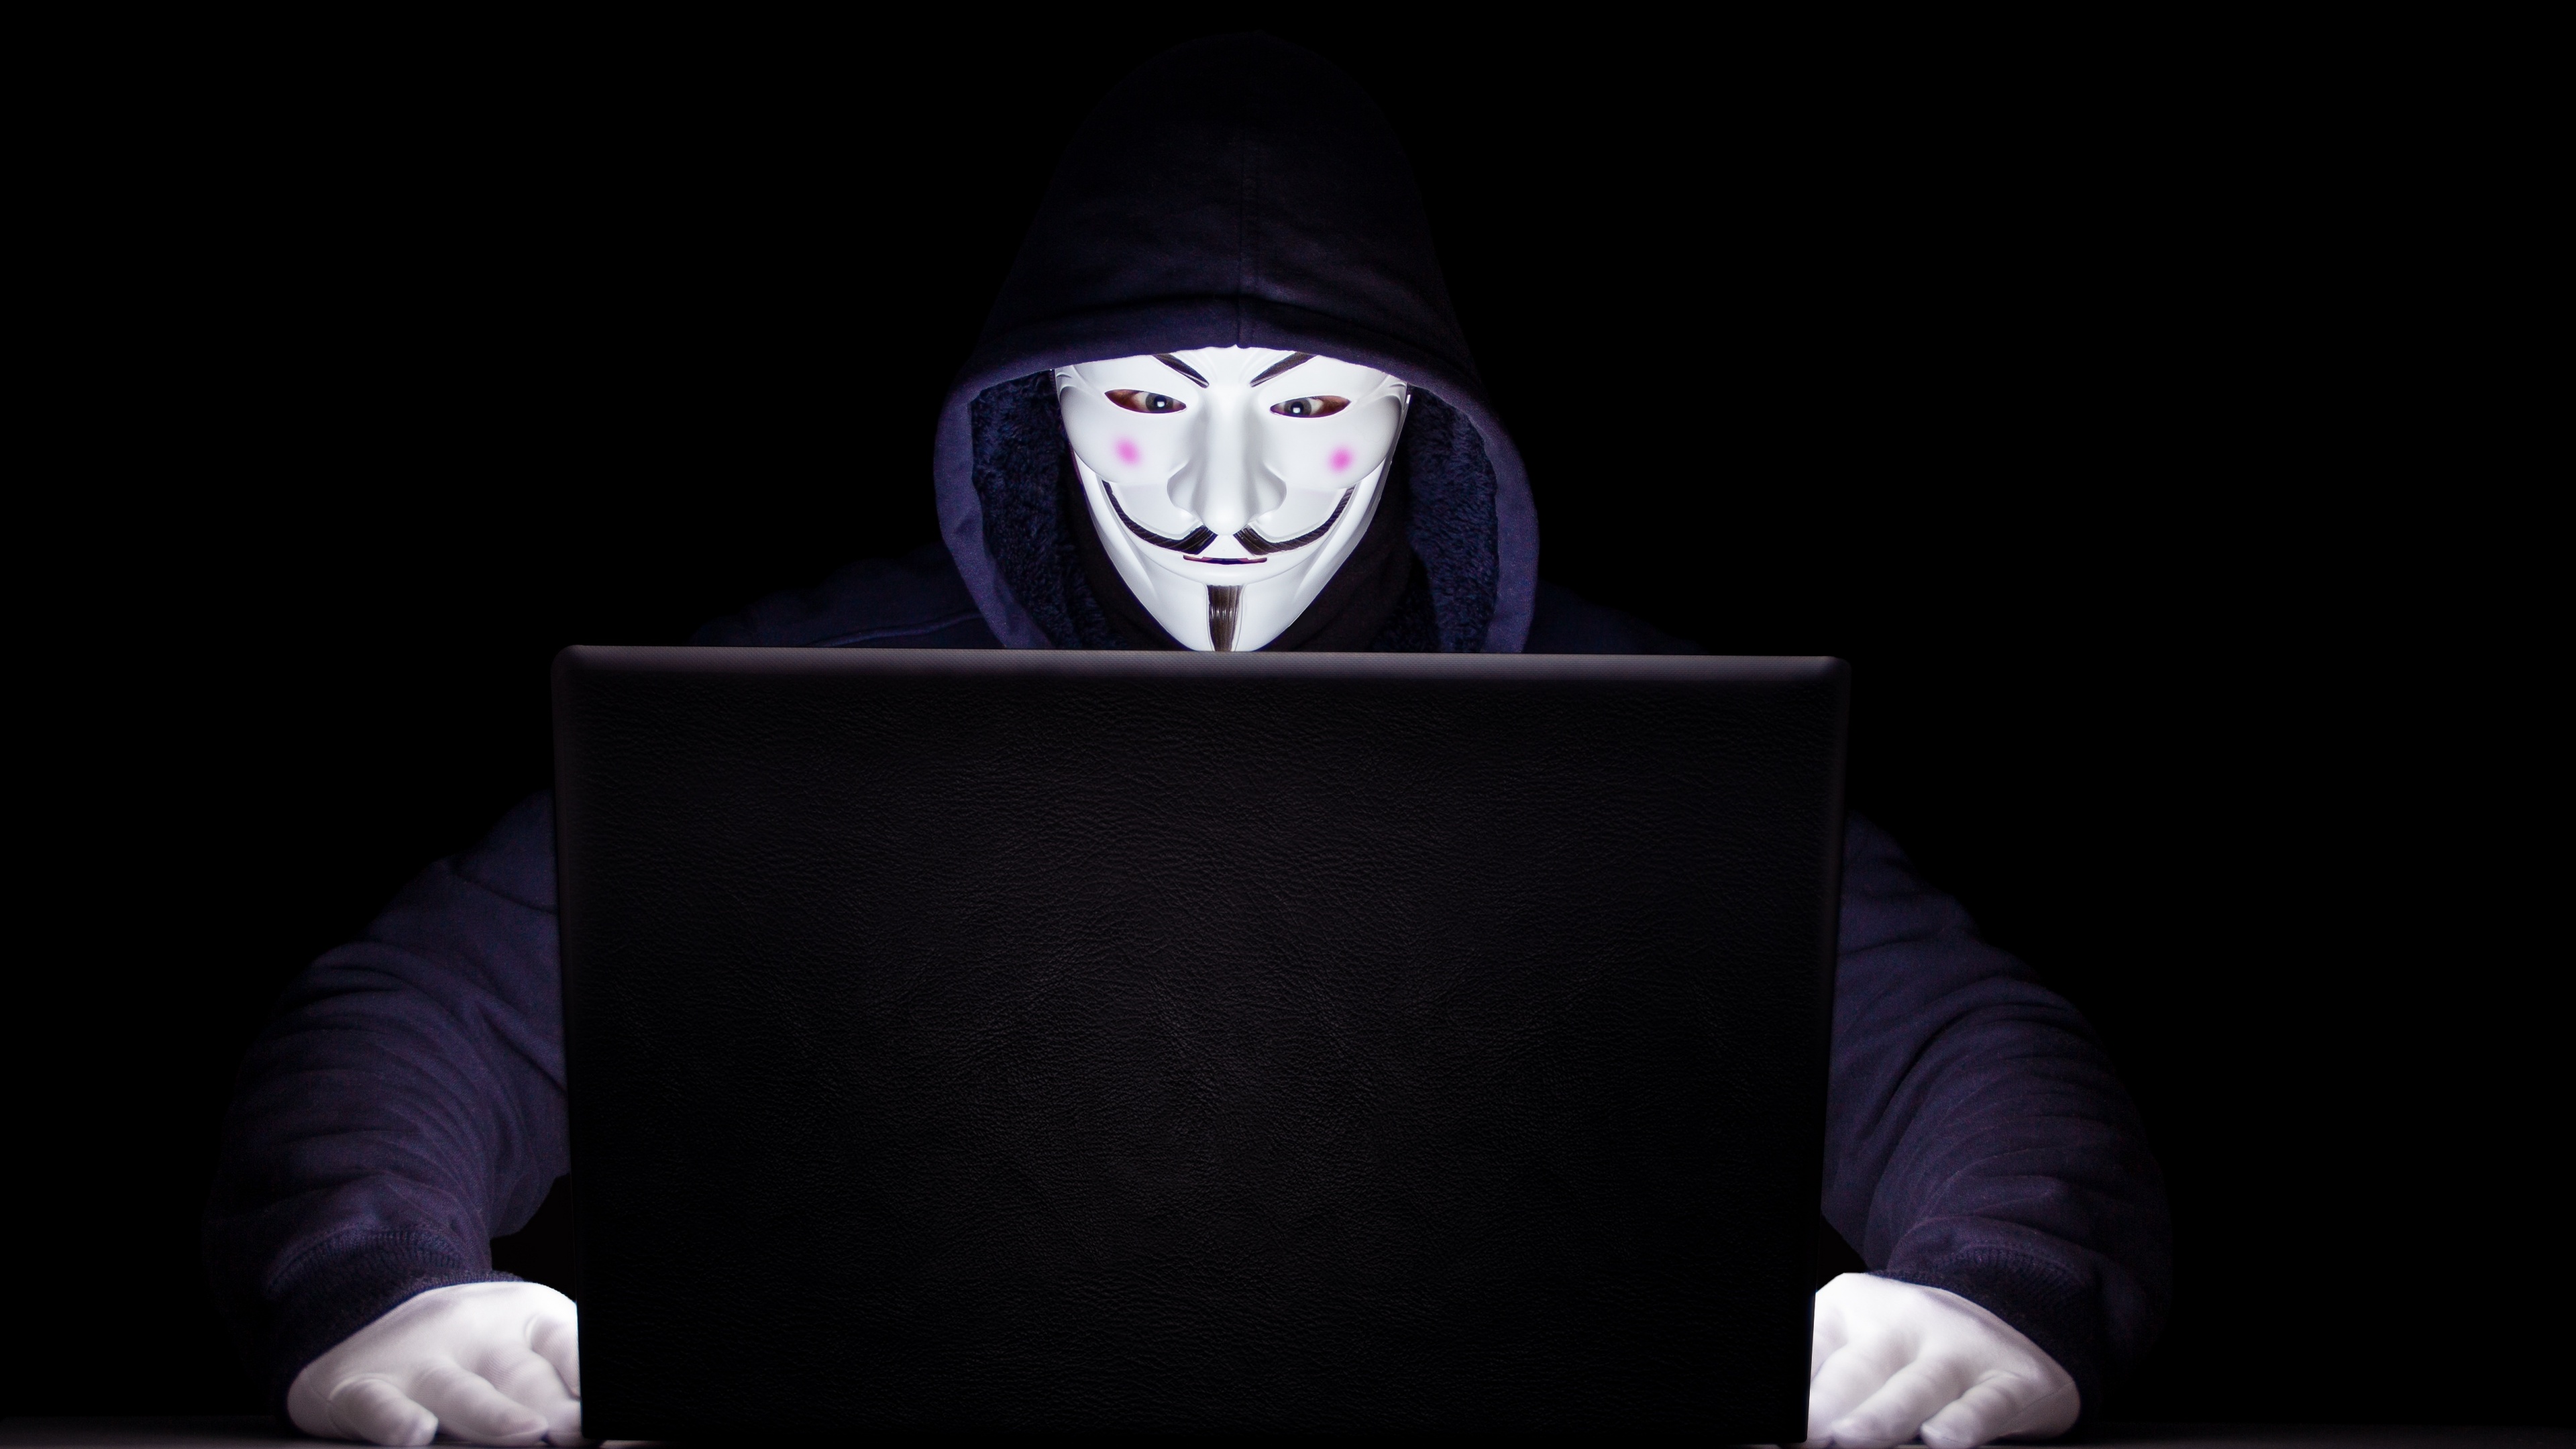 538865 anonymus hacker computer 4k hd  Rare Gallery HD Wallpapers